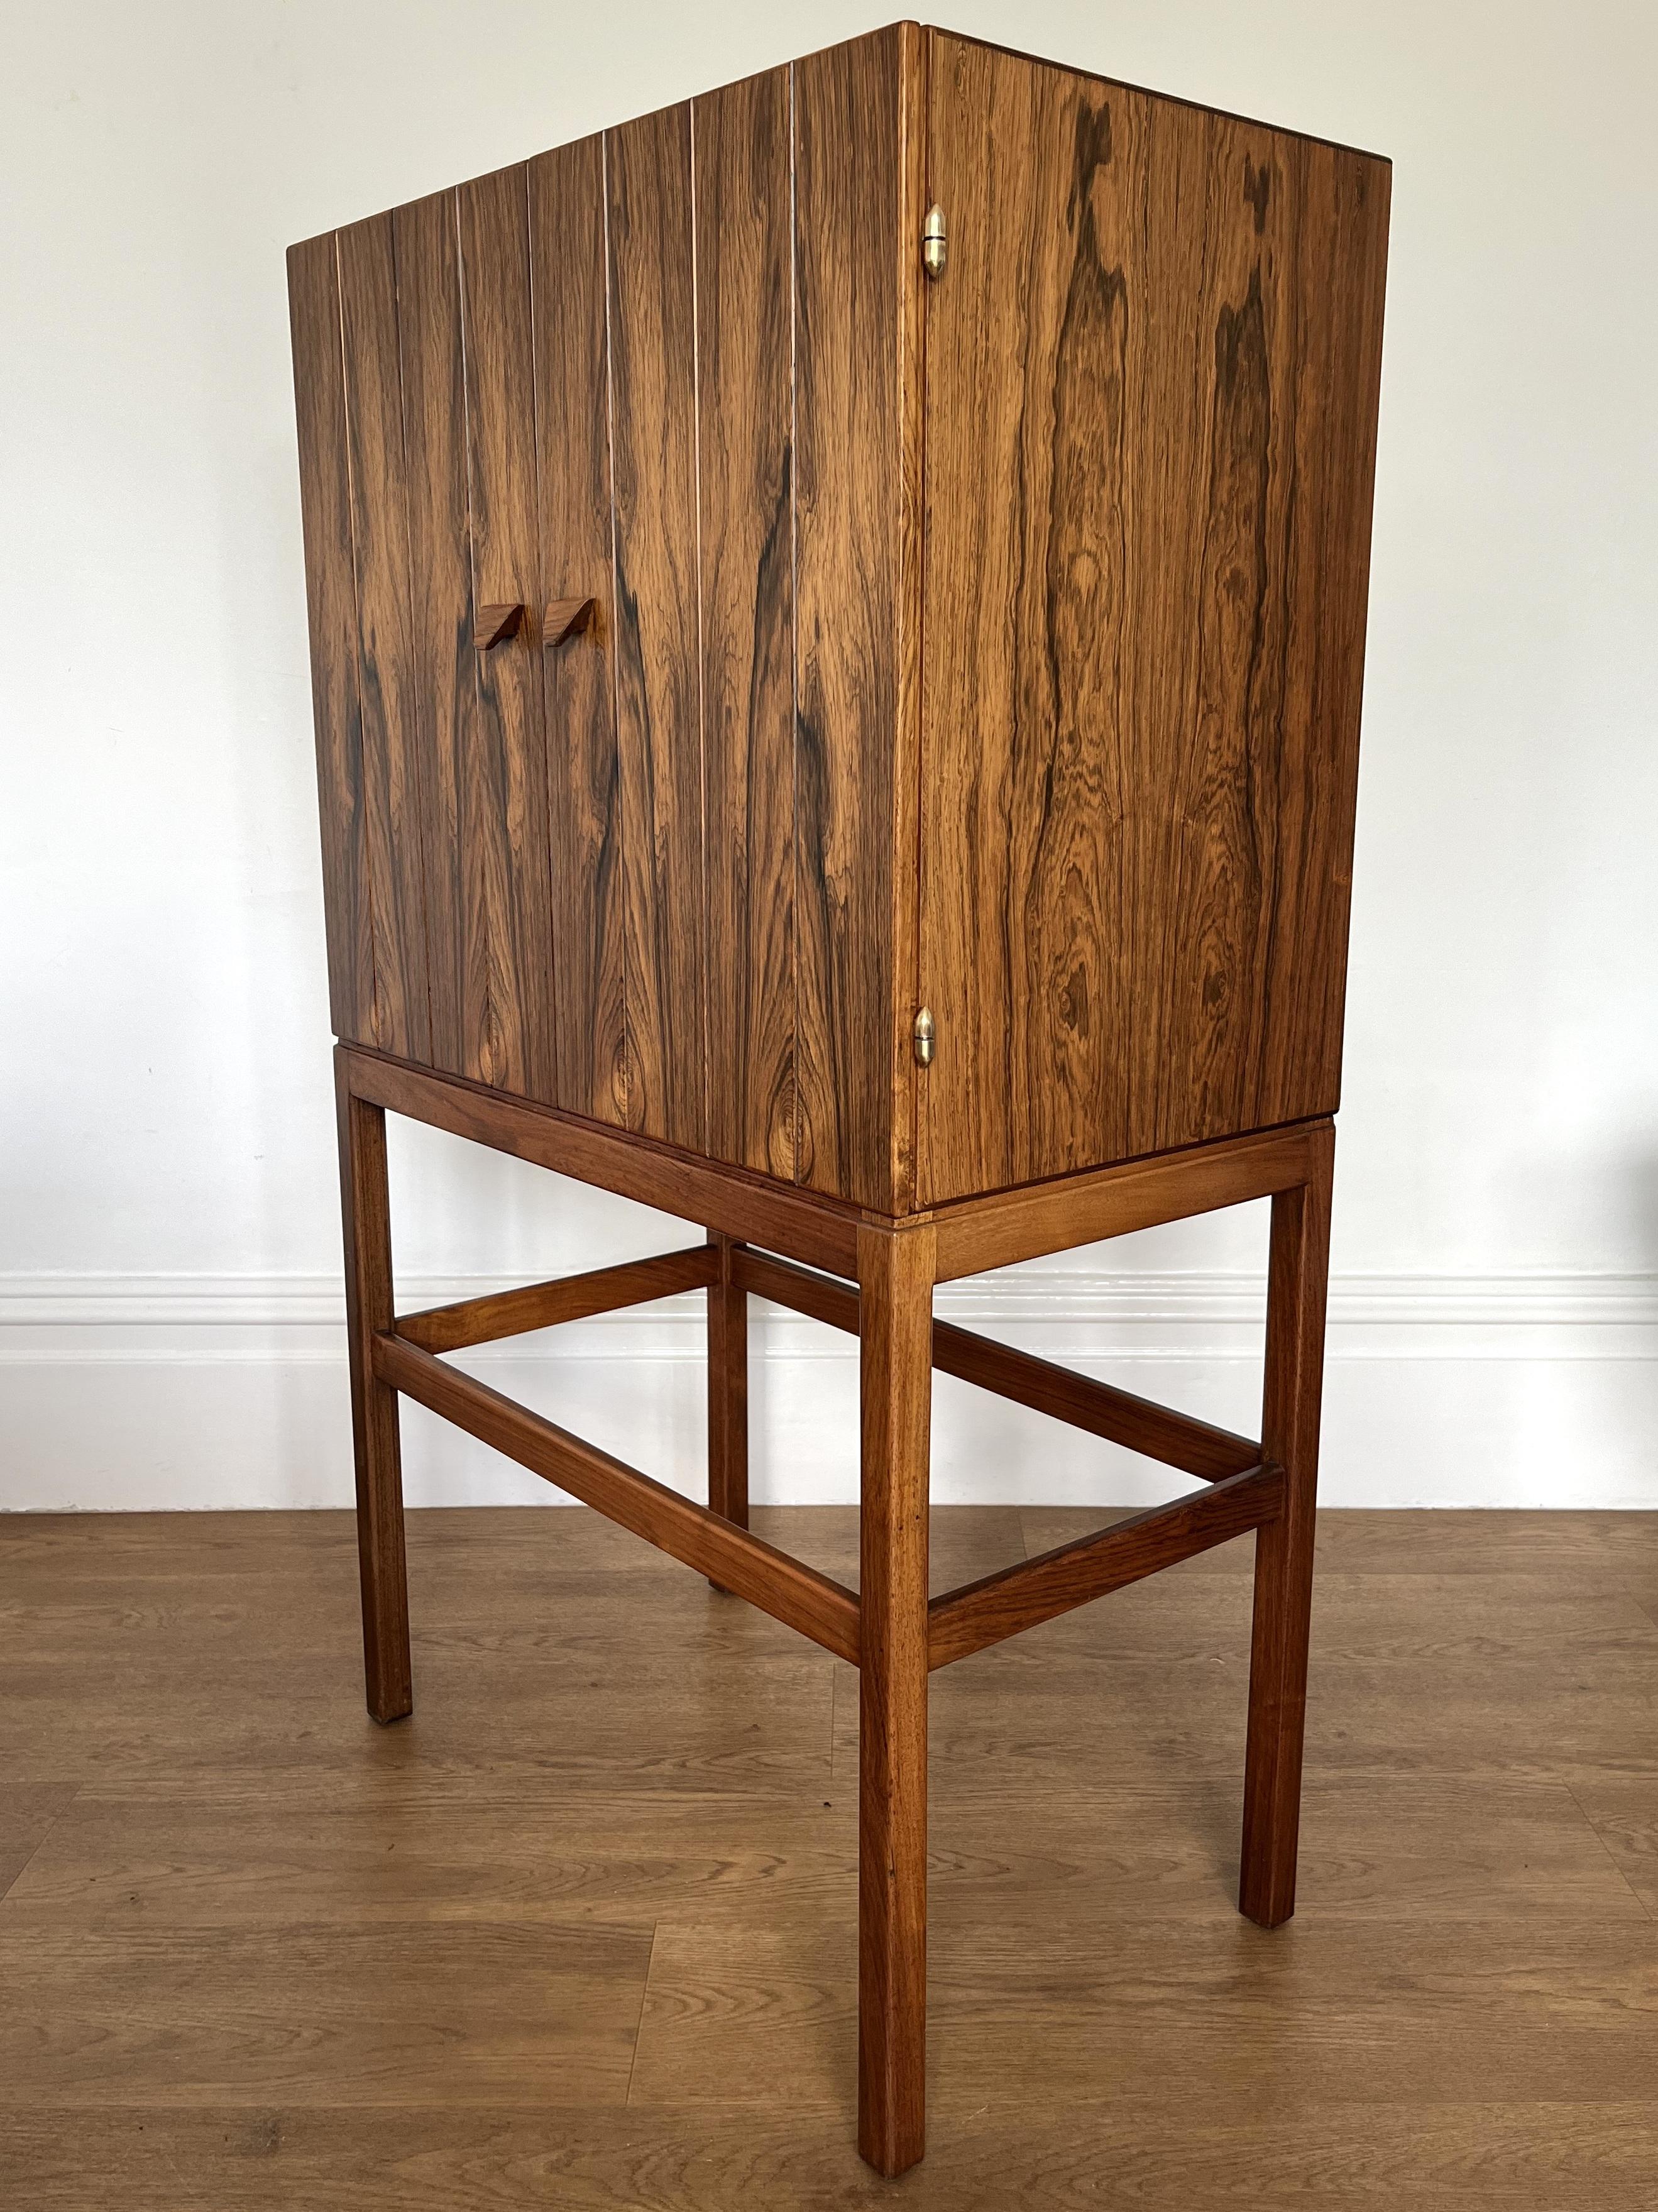 Stunning rosewood drinks cabinet designed by Kurt Østervig for KP Mobler, Denmark in the early 1960s.

Superbly crafted with great attention to detail. The cabinet features a rosewood exterior and satinwood lined interior with 3 shelves and 3